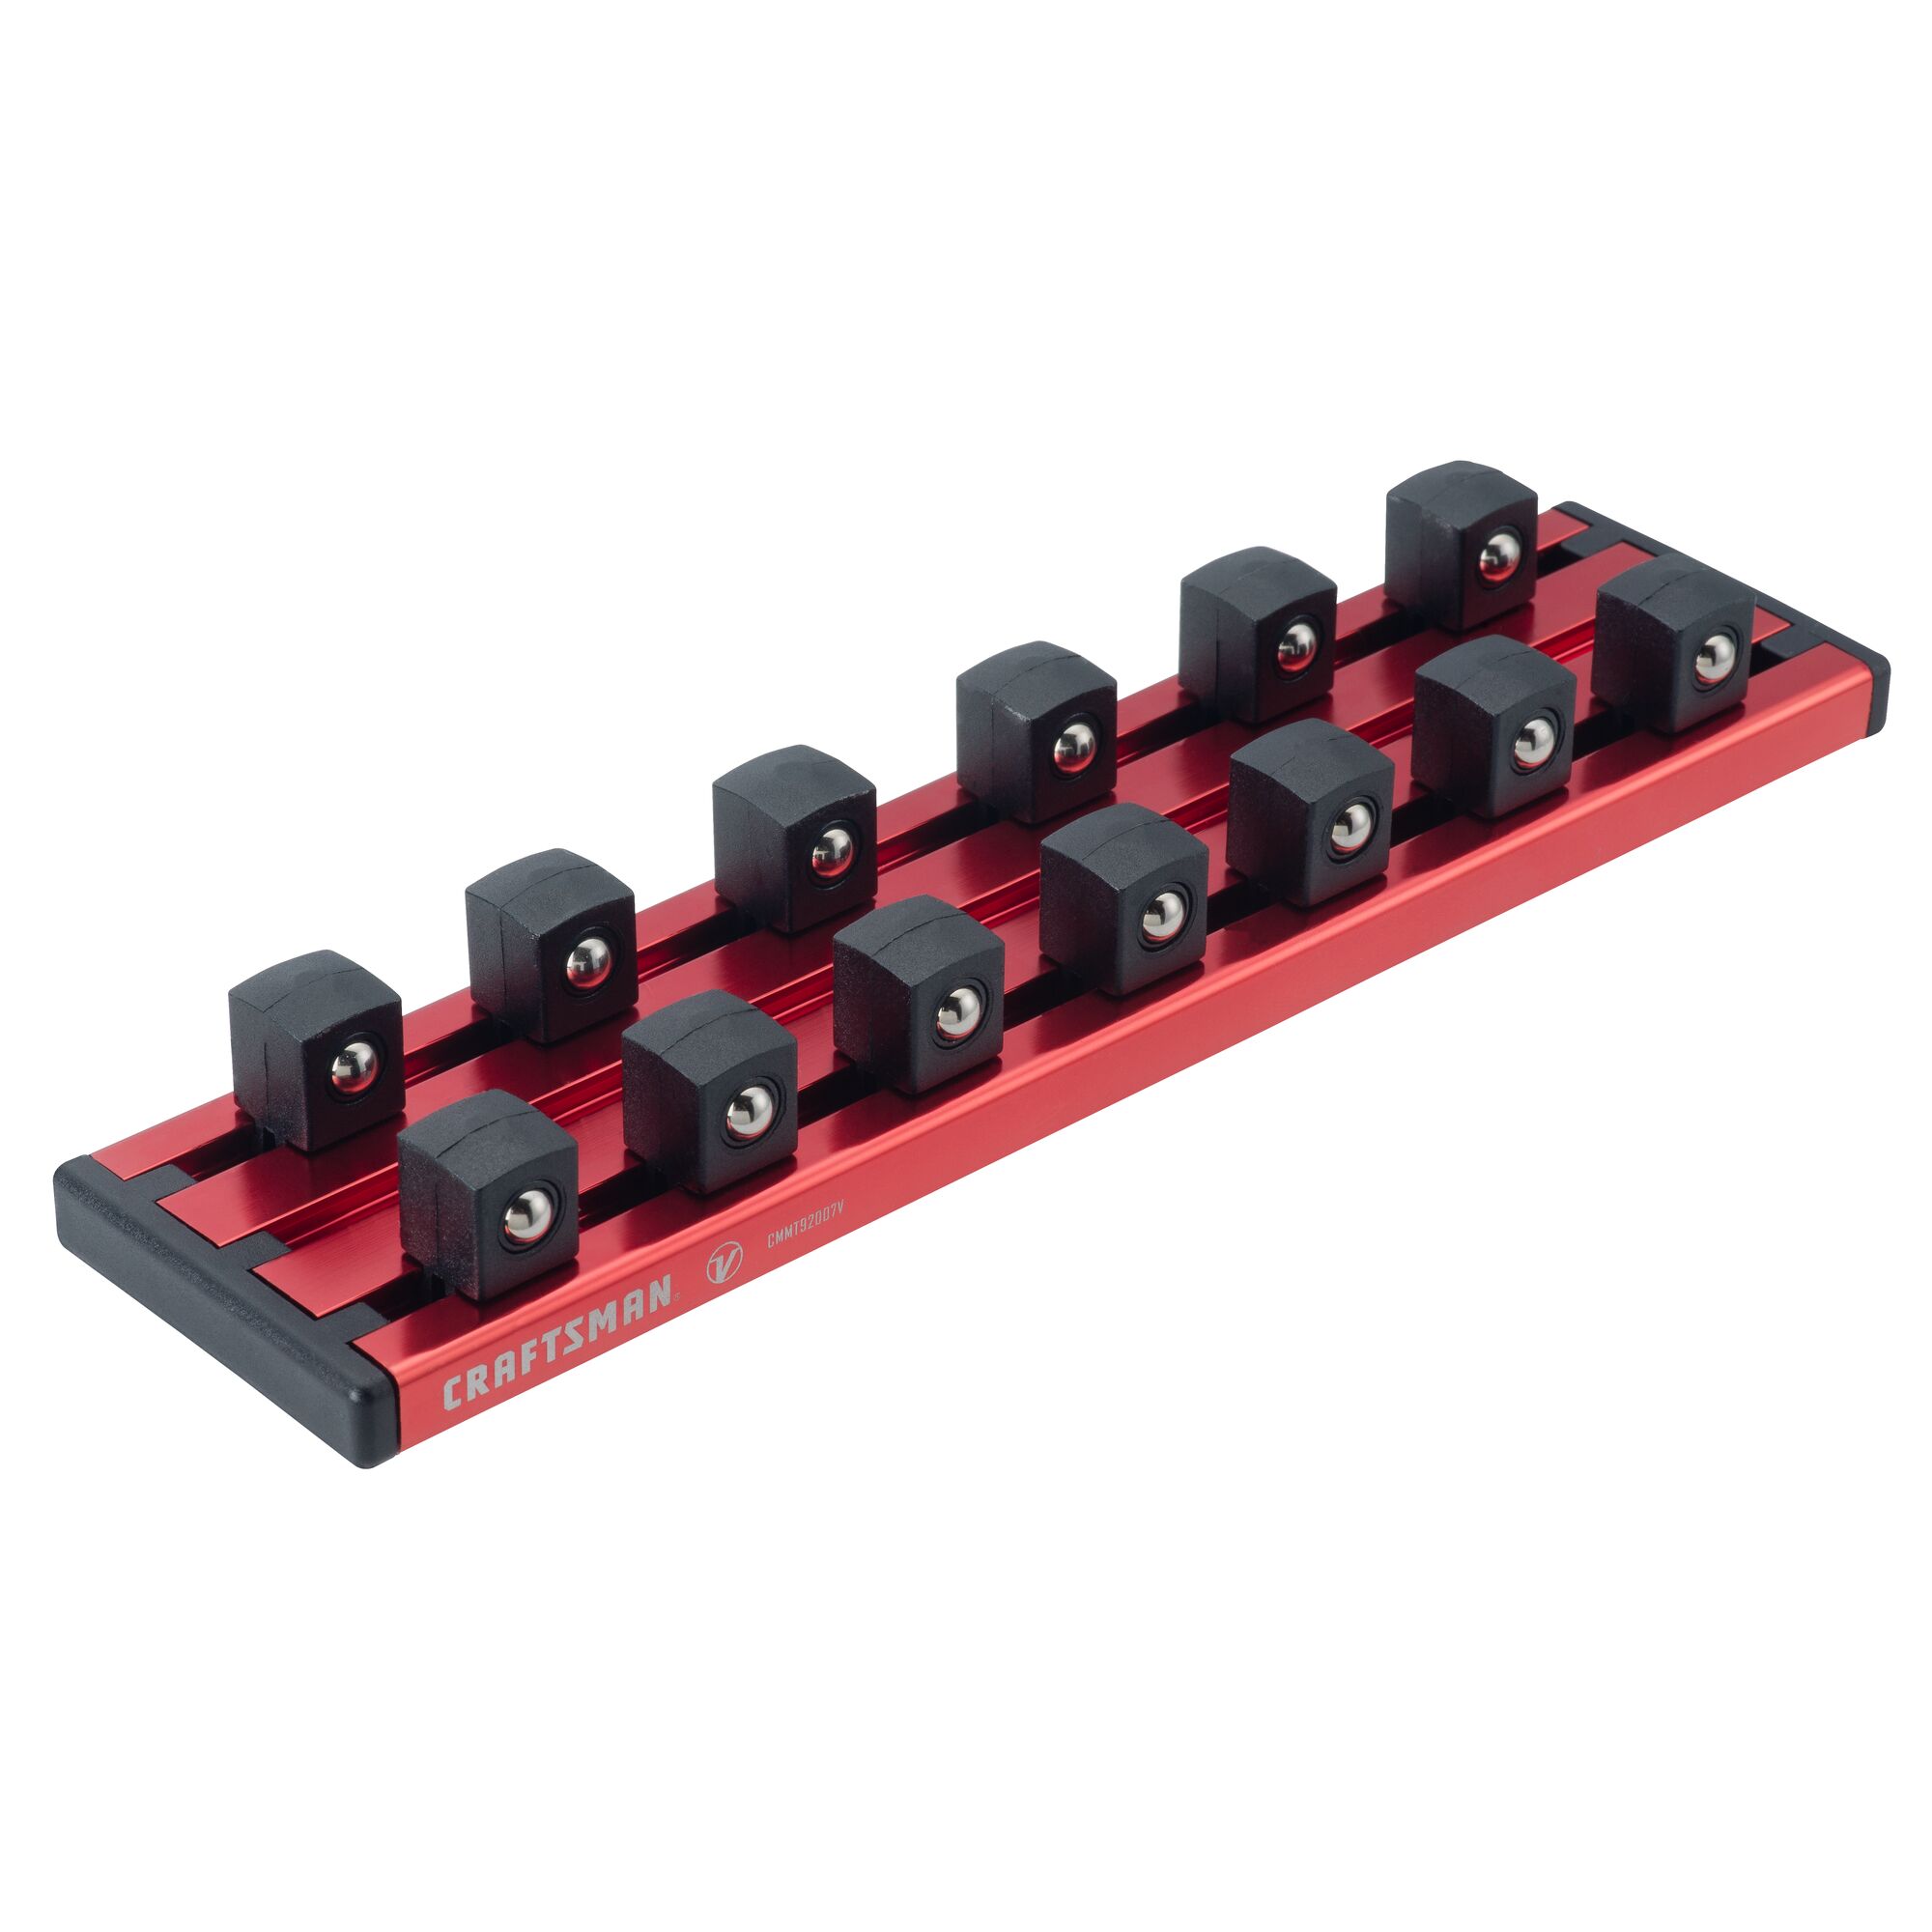 View of CRAFTSMAN Sockets: 6-Point highlighting product features